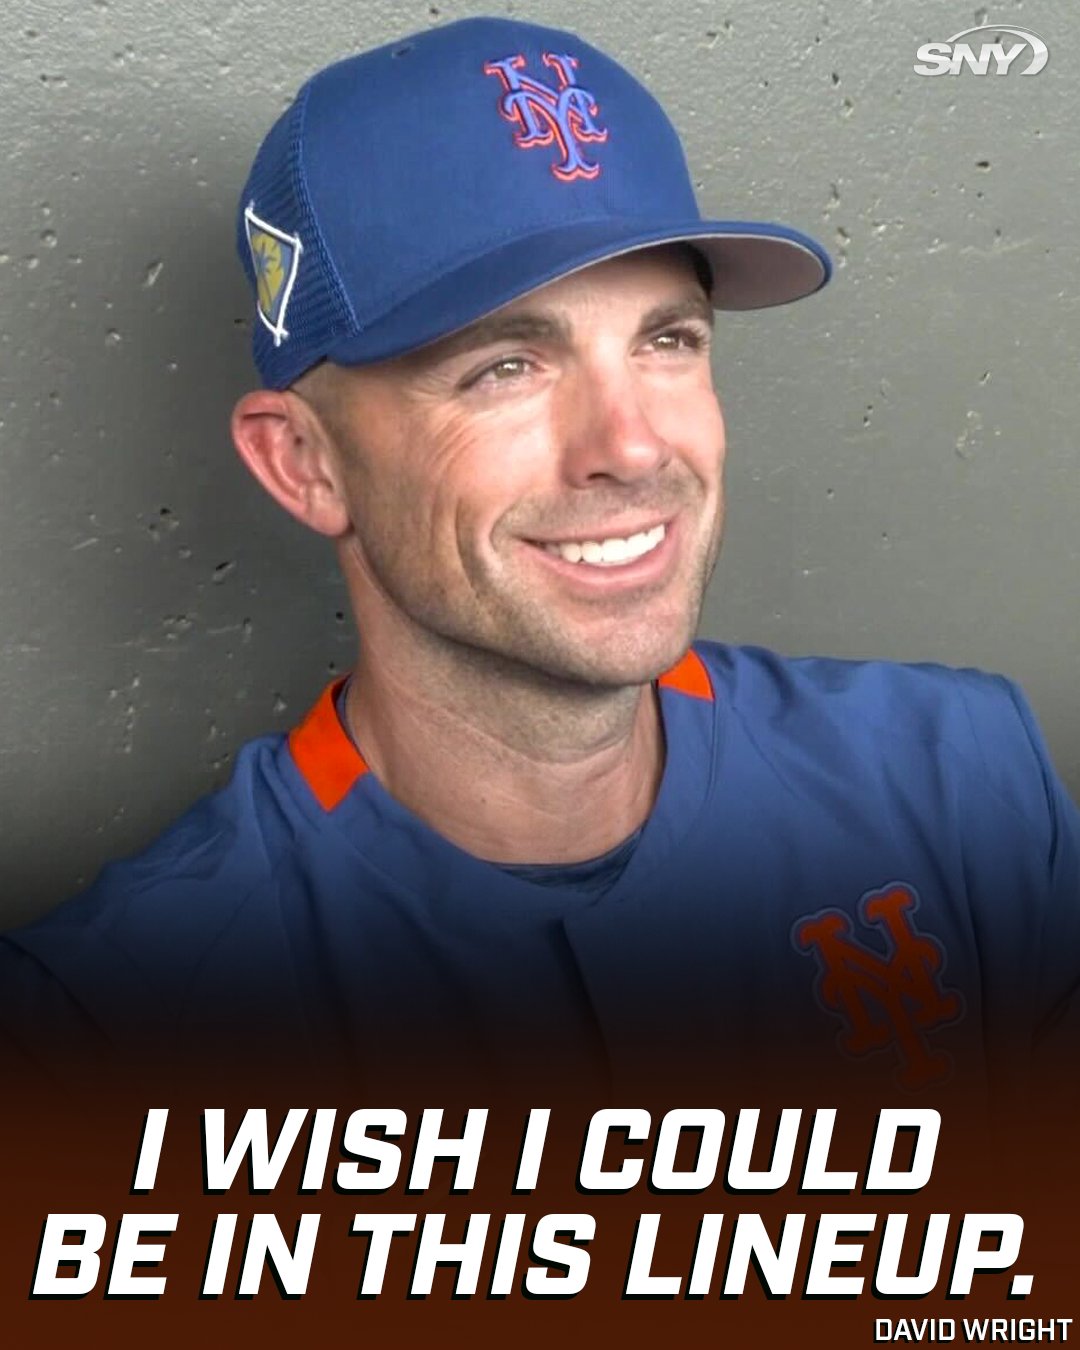 SNY Mets on X: David Wright gives his thoughts on the 2022 Mets